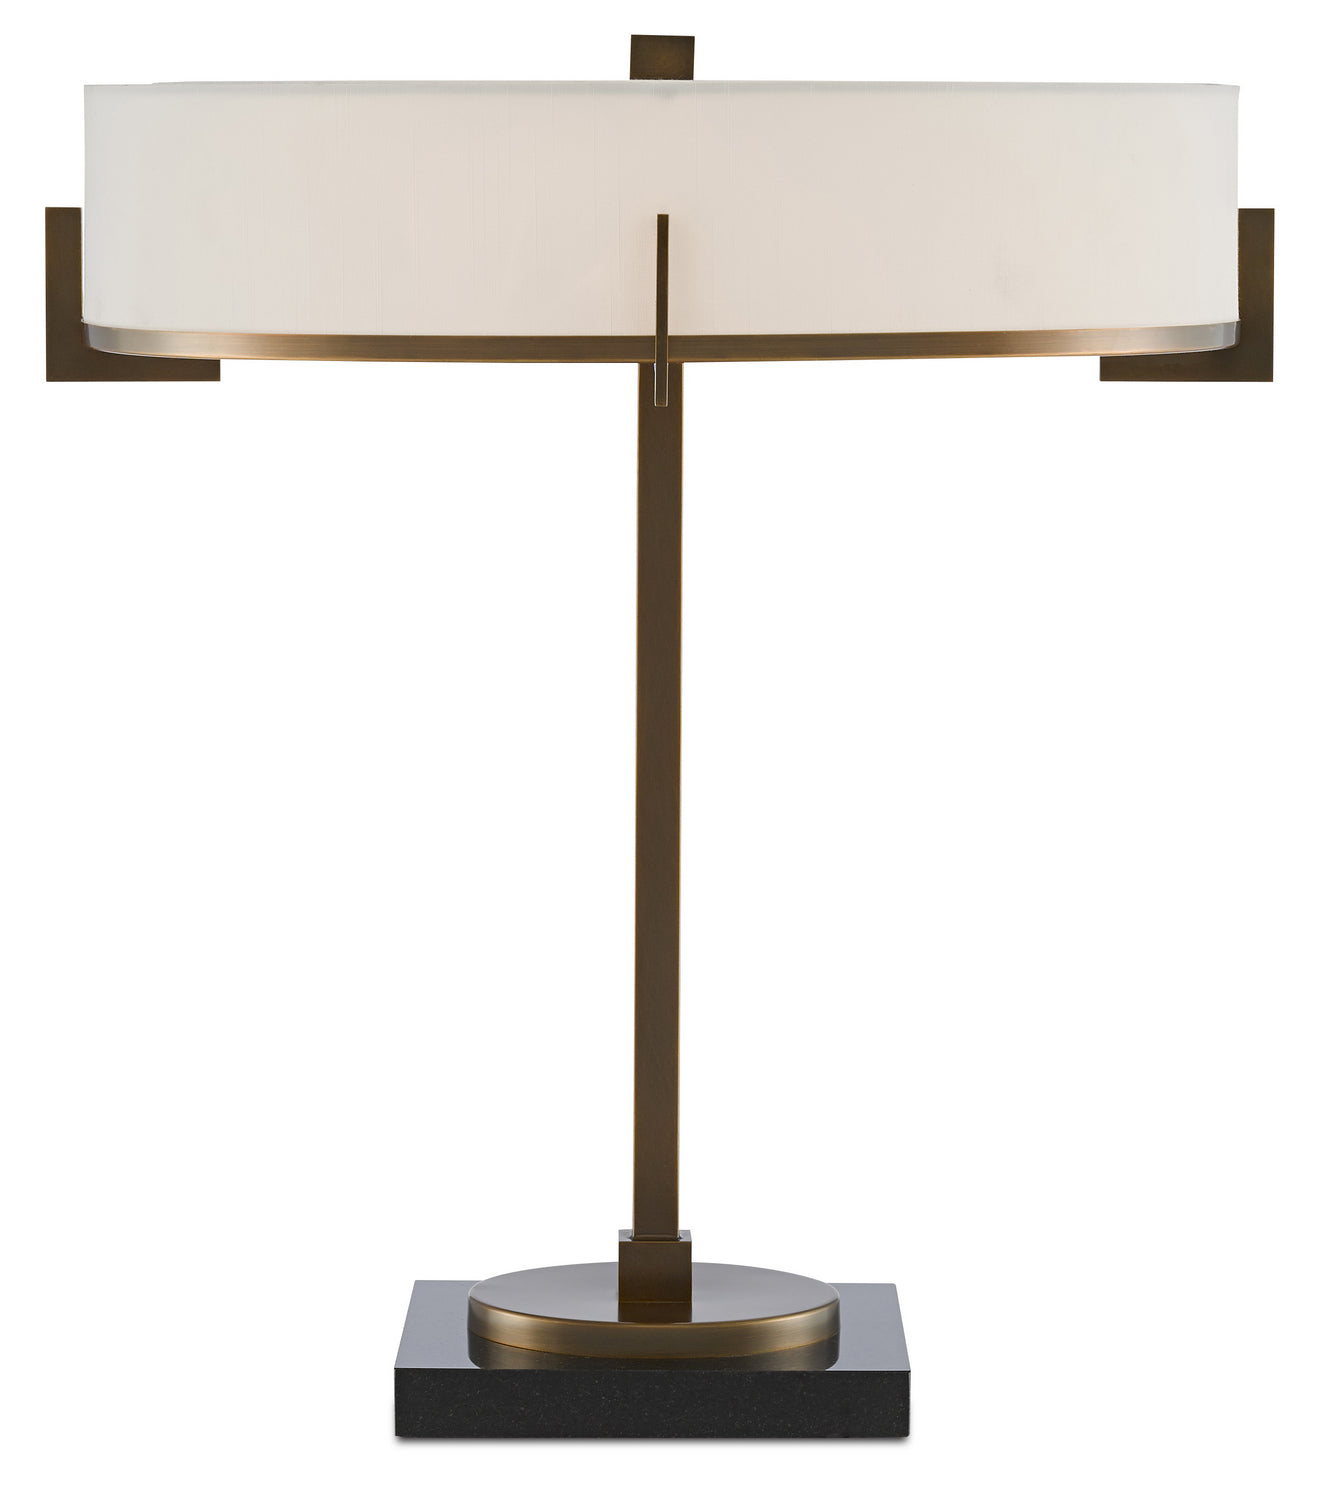 Three Light Table Lamp from the Jacobi collection in Antique Brass/Black finish